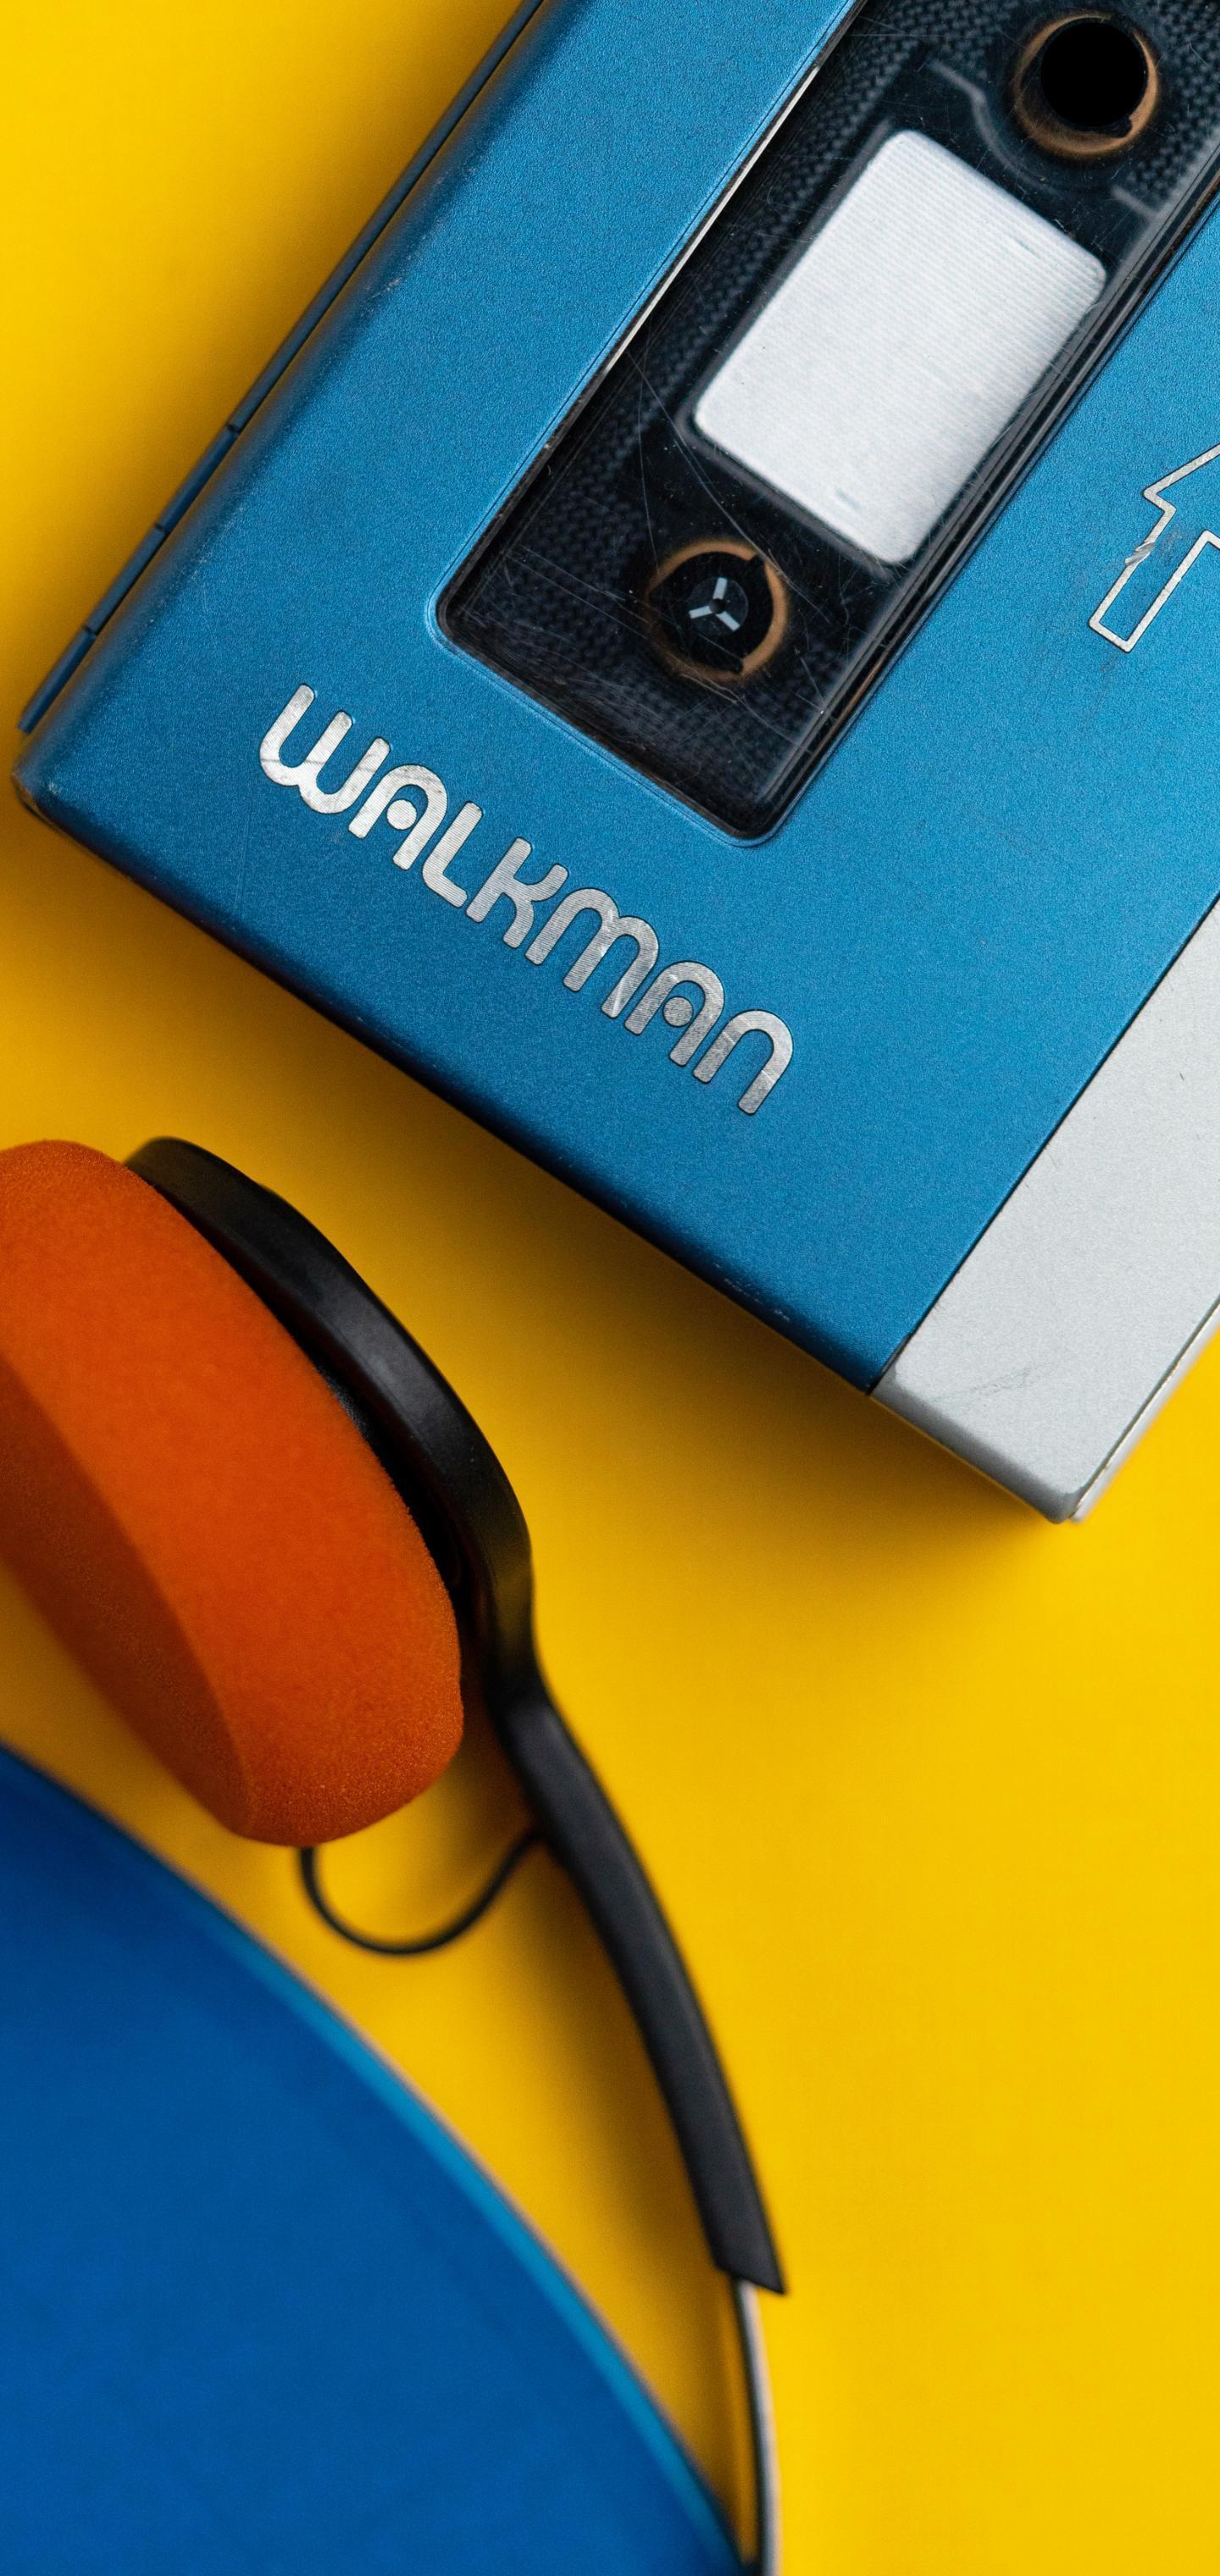 Walkman Android Wallpapers Wallpaper Cave